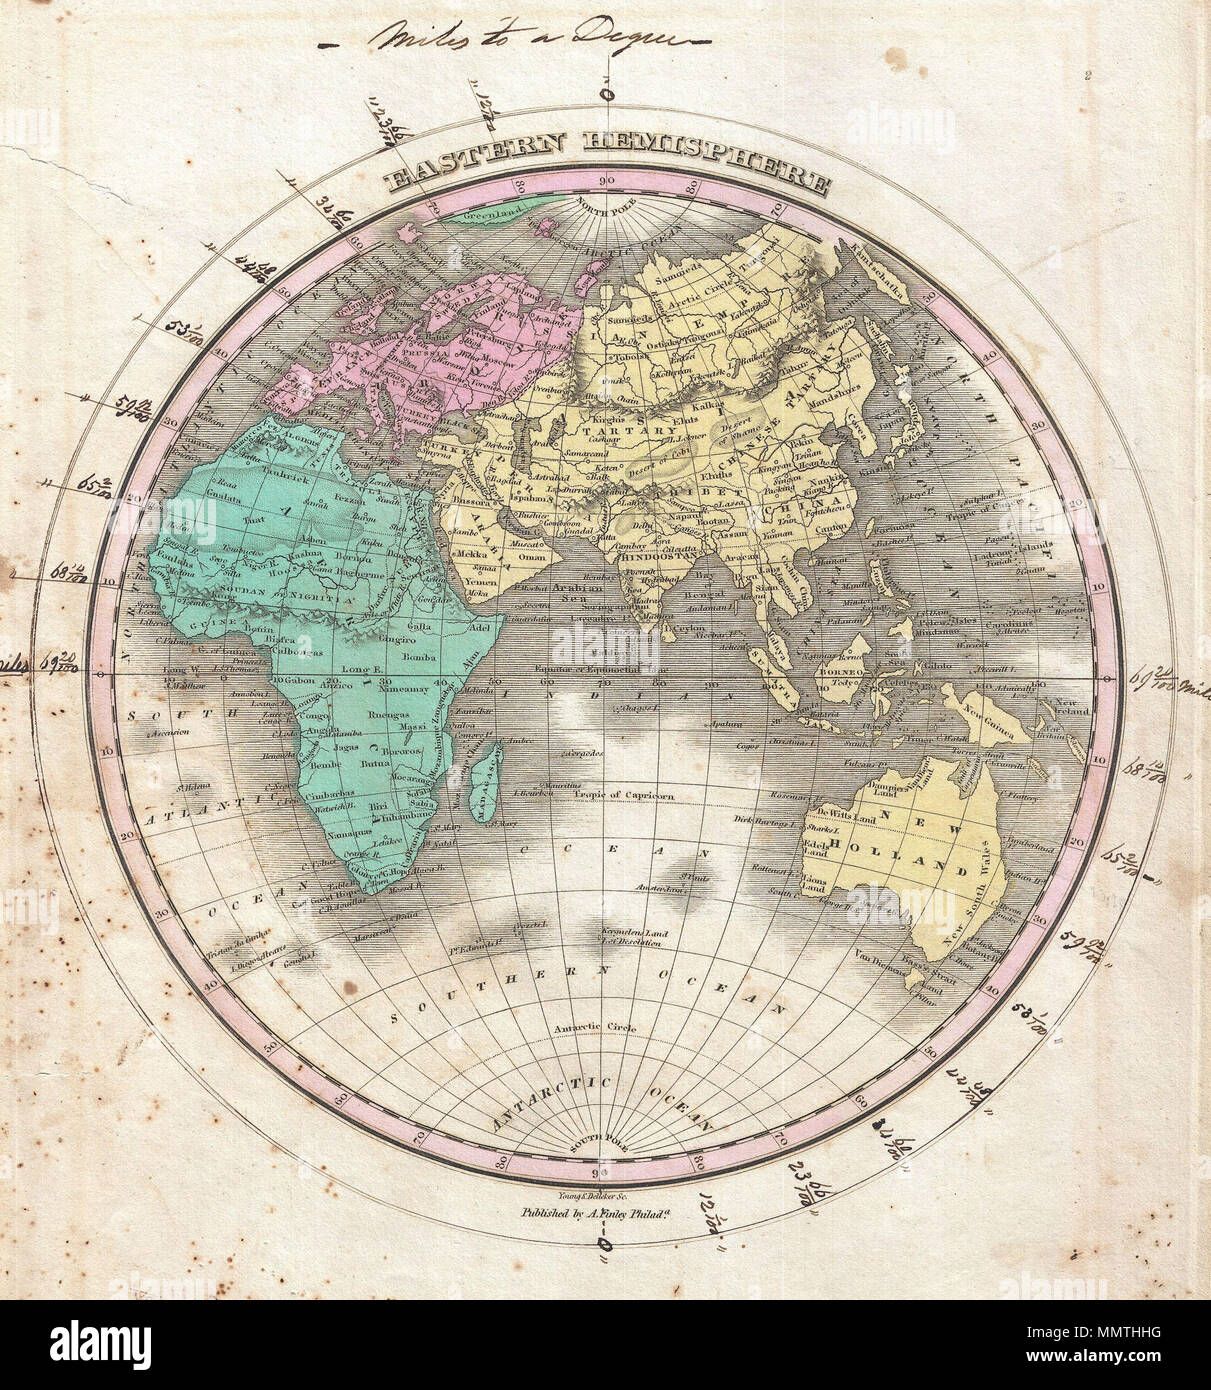 .  English: This is Finley’s desirable 1827 map of the Eastern Hemisphere. Includes Africa, Europe, Asia and Australia. Identifies deserts, rivers, mountain rangers, lakes, and major cities. Color coded according to continent. Australia is included with Asia. Original owner has added a miles to a degree scale surrounding the image. Engraved by Young and Delleker for the 1827 edition of Anthony Finley's General Atlas .  Eastern Hemisphere.. 1827 (undated). 1827 Finley Map of the Eastern Hemisphere (Asia, Australia, Europe, Africa) - Geographicus - EasternHemisphere-finley-1827 Stock Photo